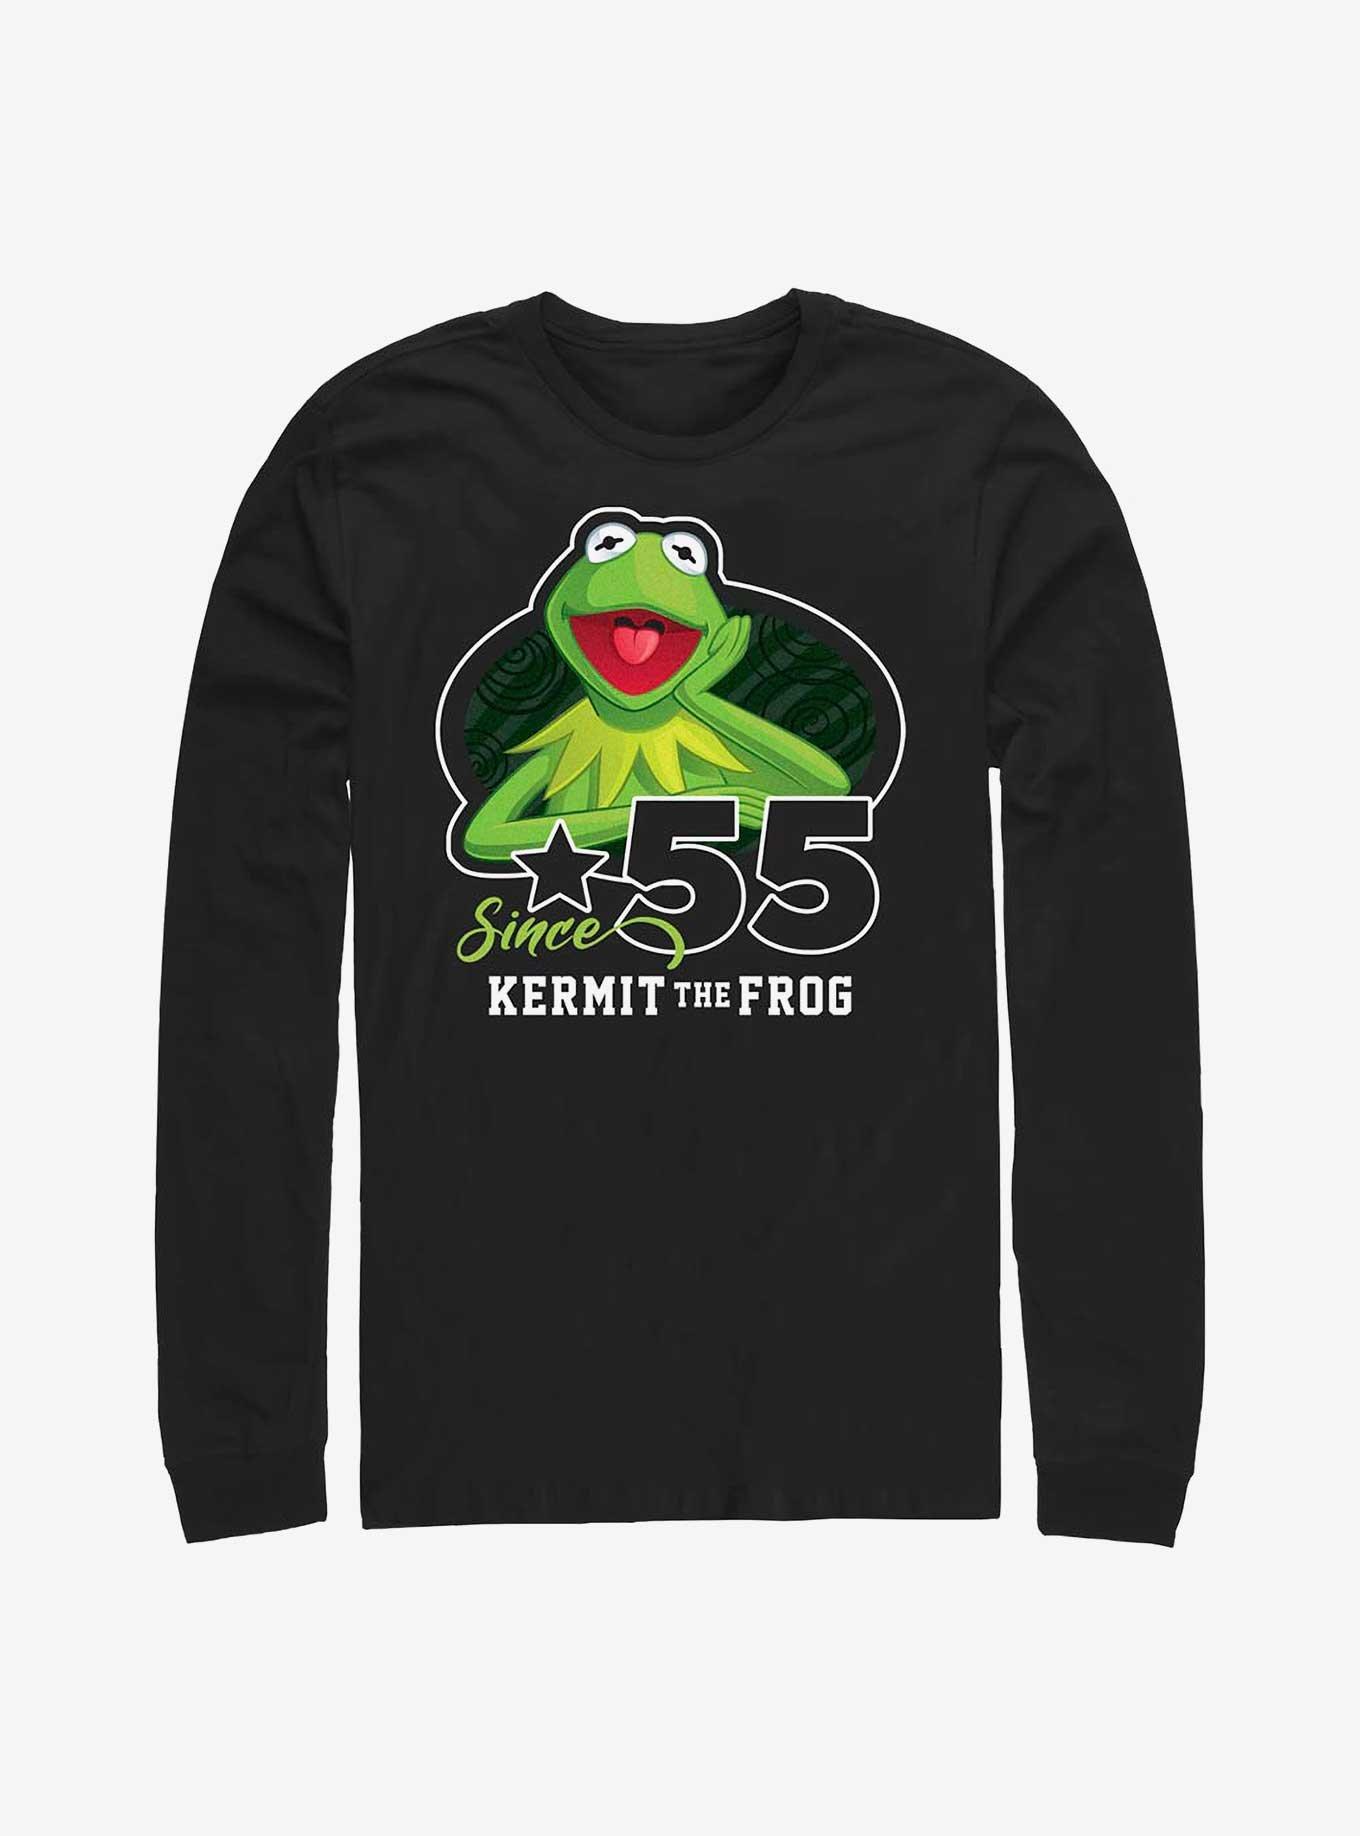 Disney The Muppets Kermit The Frog Since '55 Long-Sleeve T-Shirt, , hi-res